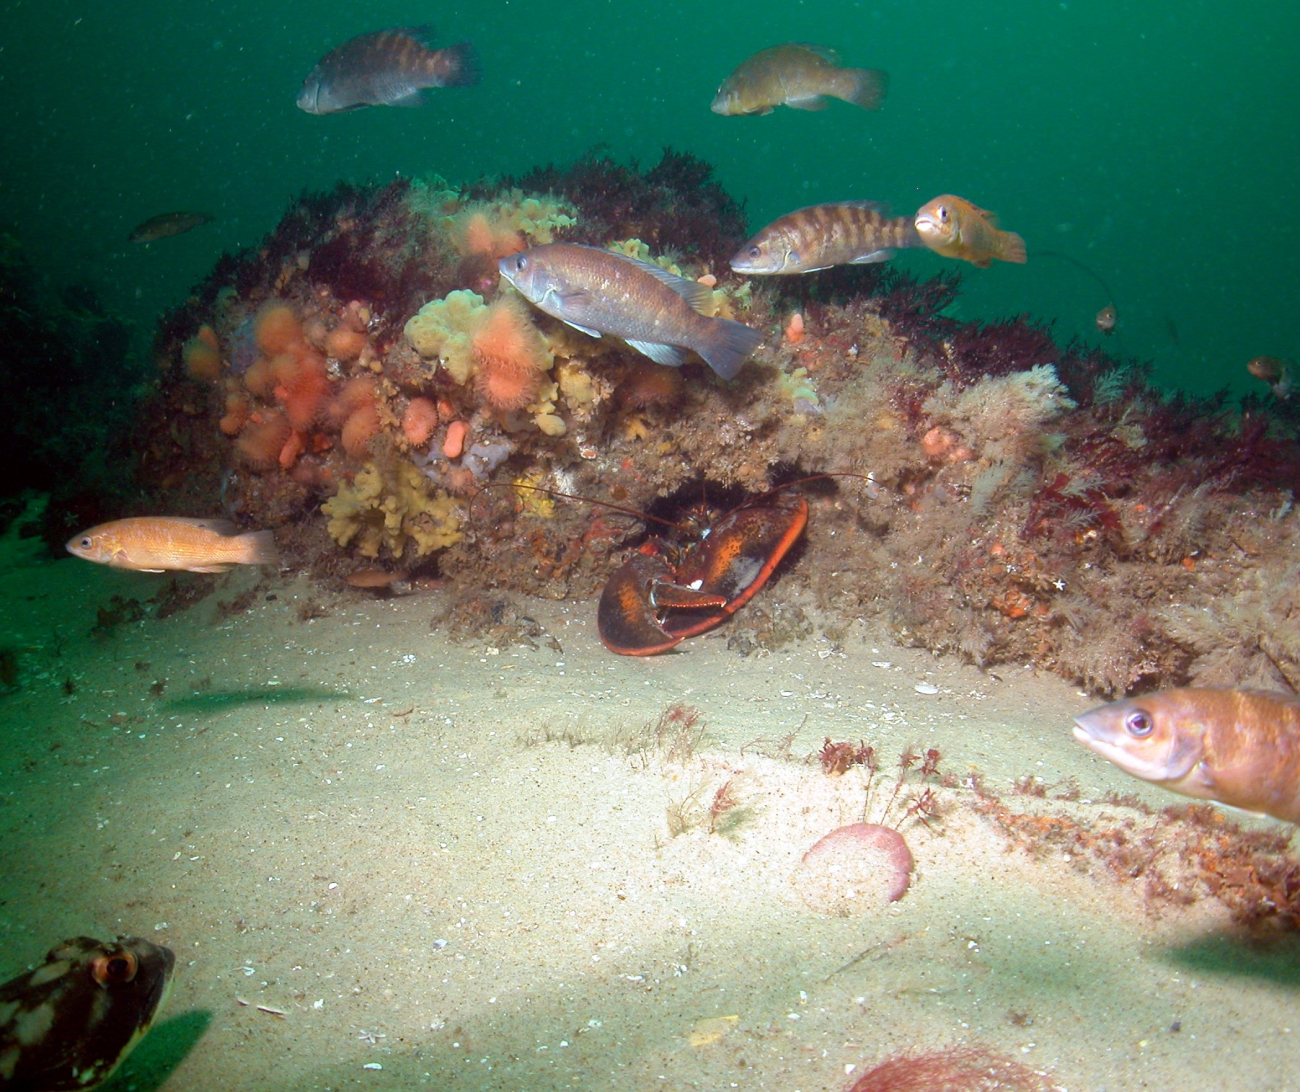 A lobster hides in the wooden frames of the Paul Palmer shipwreck ascunner swarm above